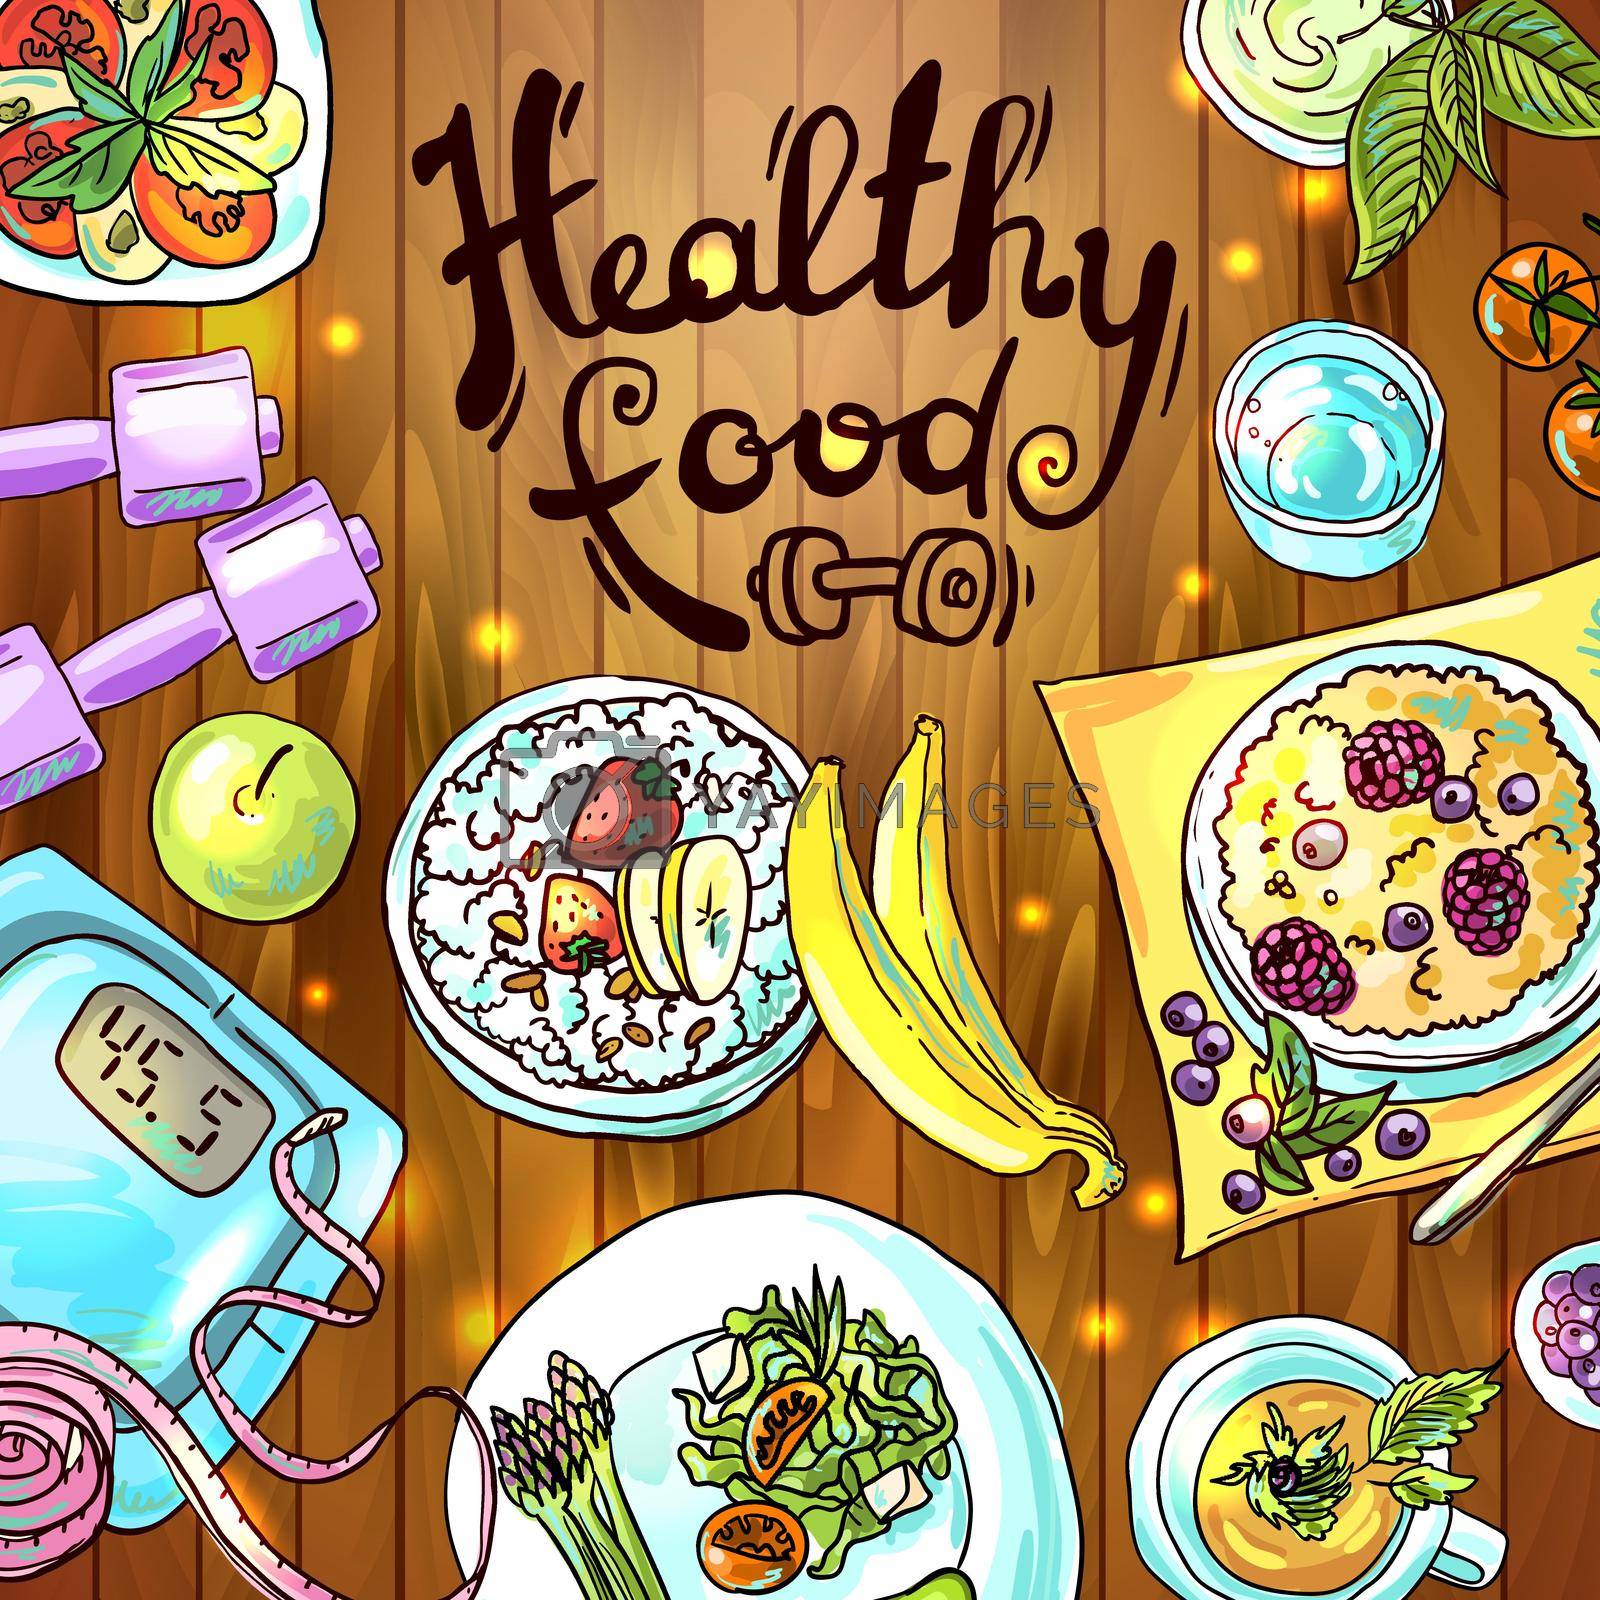 Beautiful hand- drawn illustration healthy food for your design